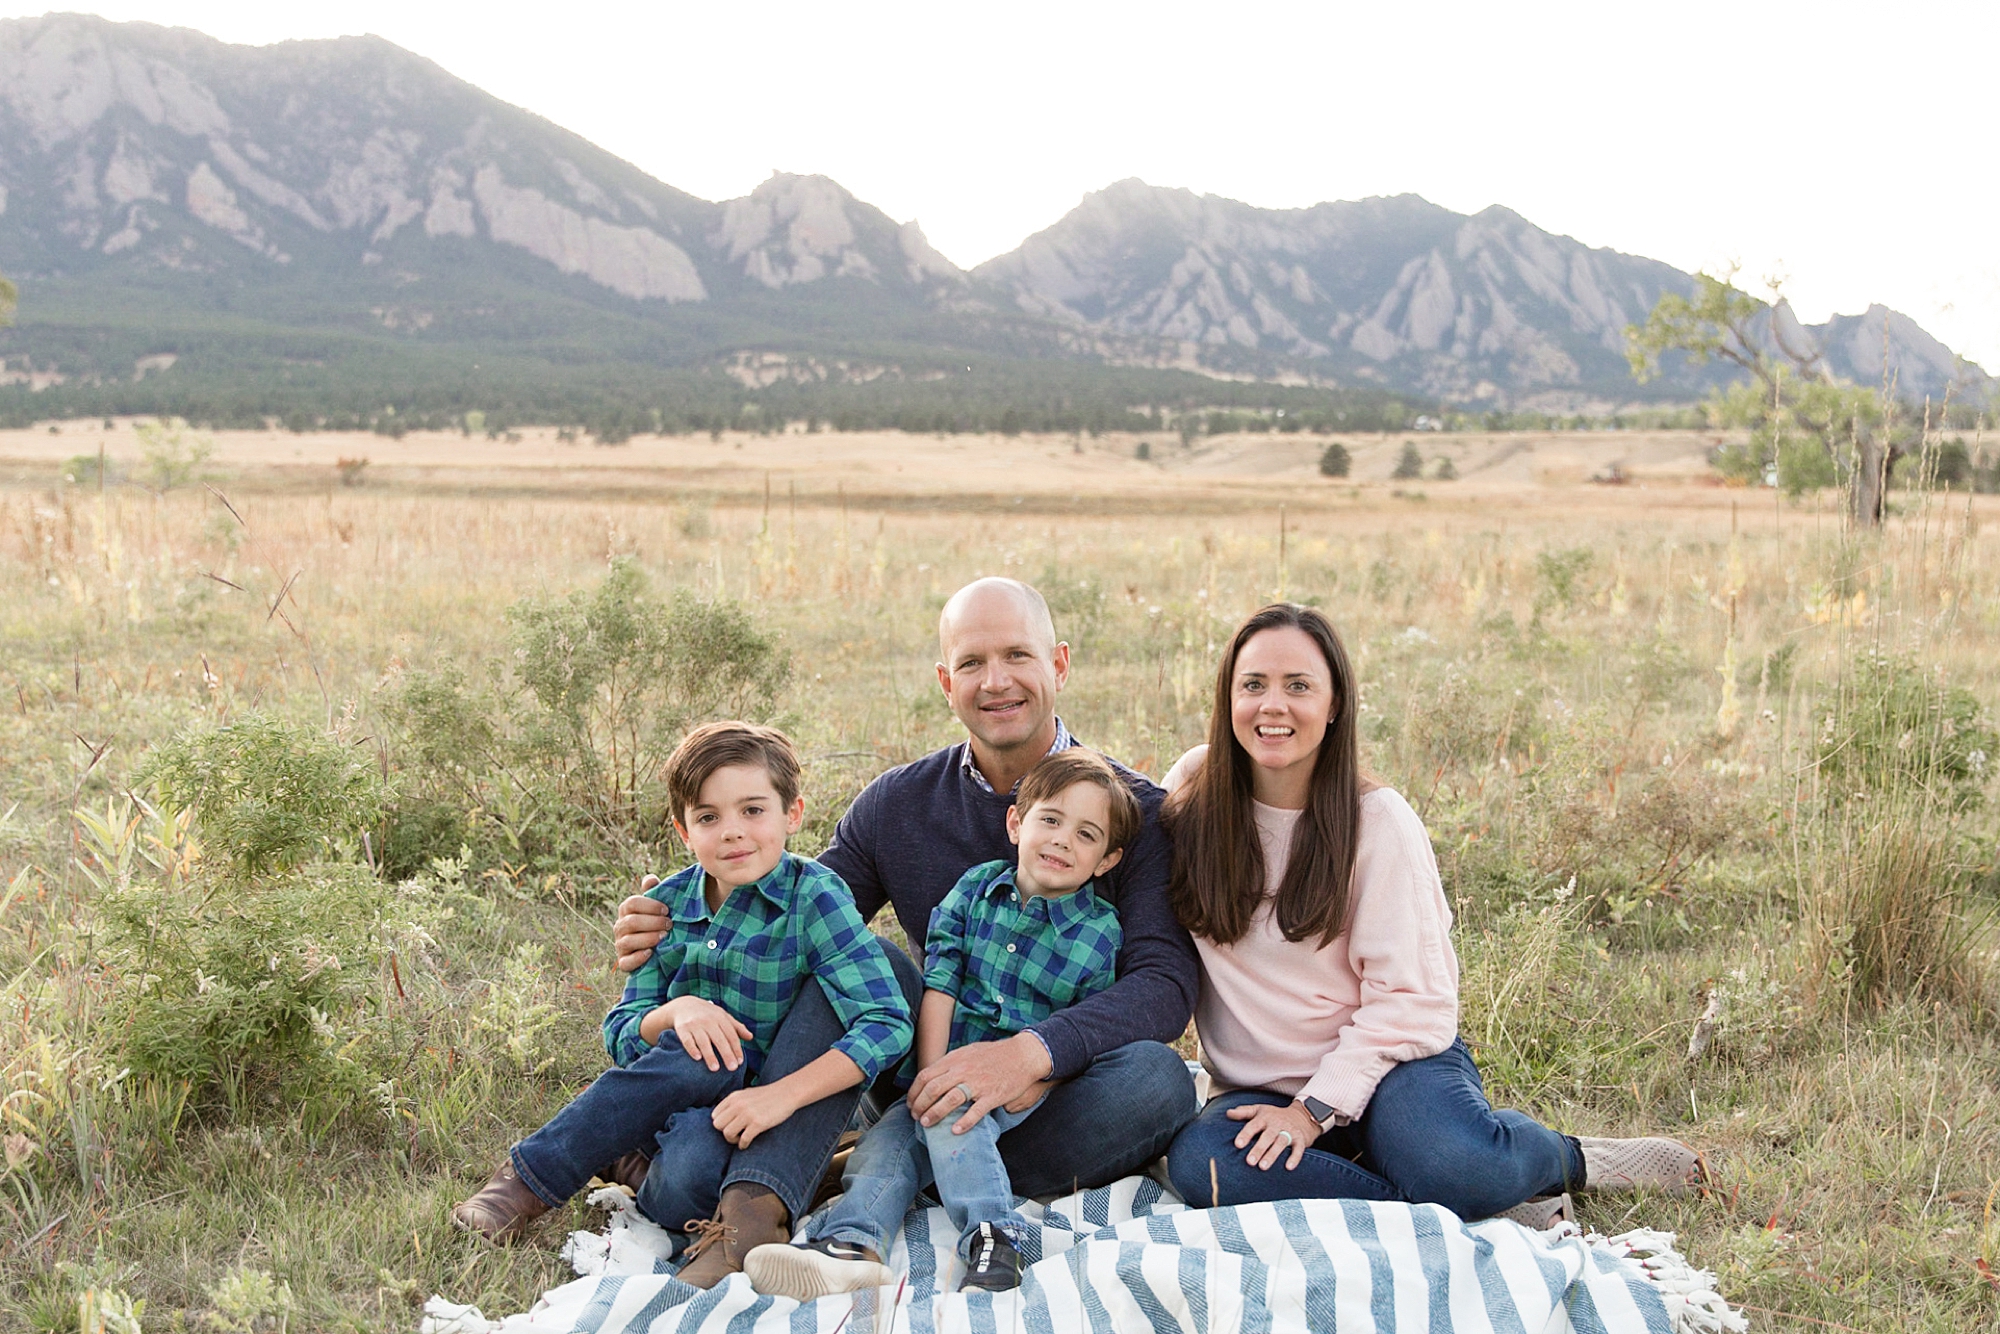 Northern Colorado Top 10 Locations for Family Photo Sessions